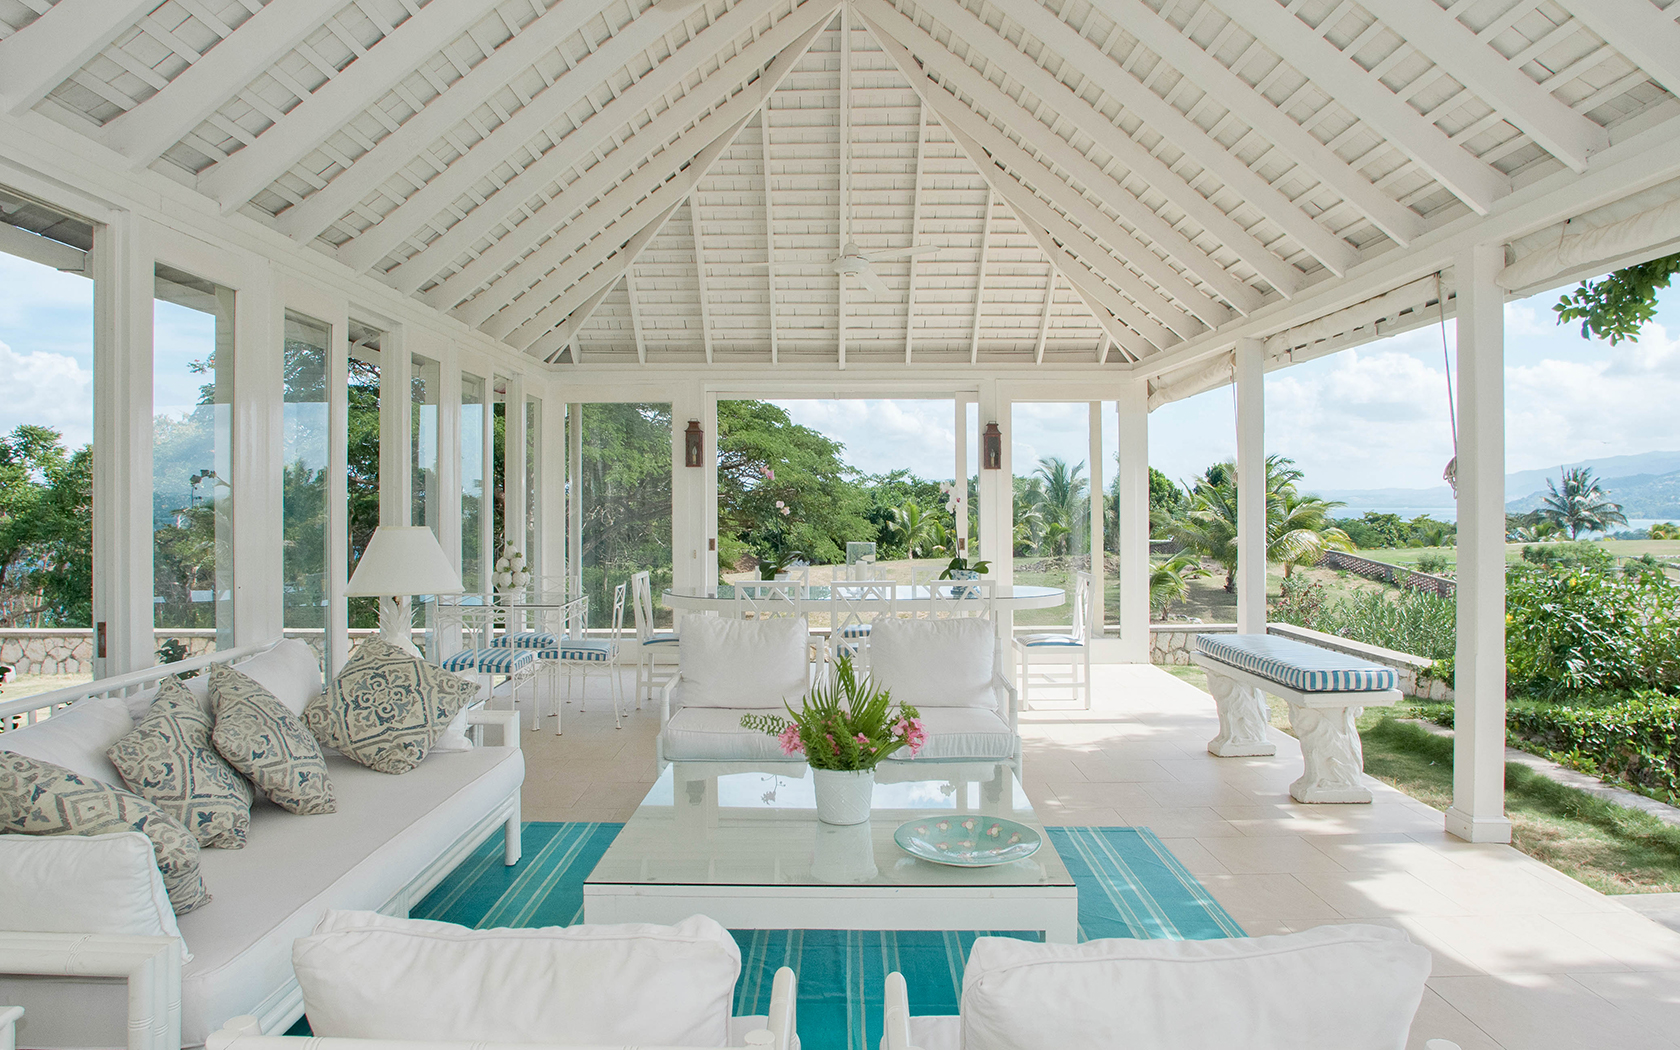 spacious patio in a tropical location 